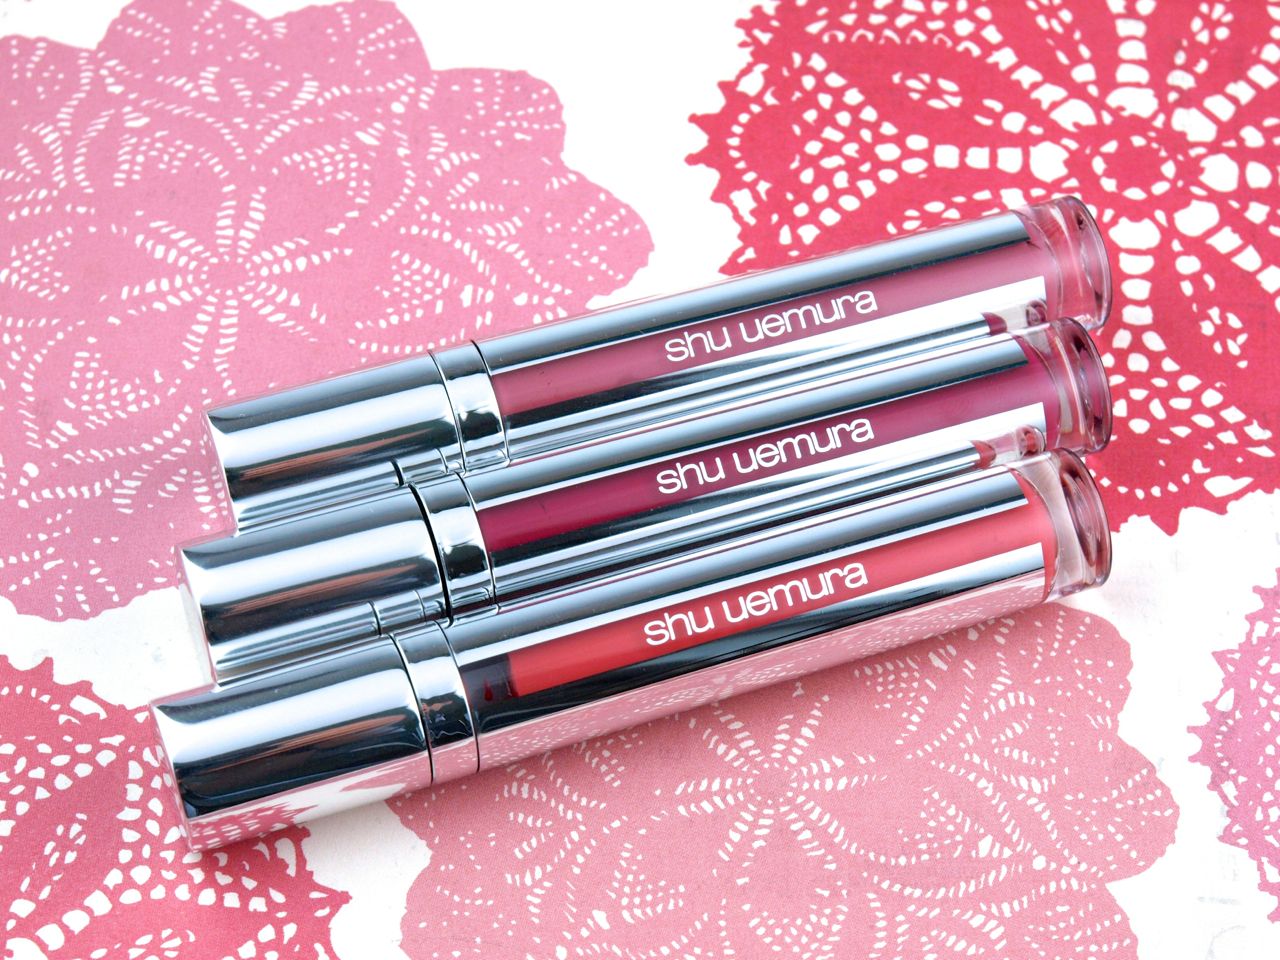 Shu Uemura Tint in Gelato Lip and Cheek Color in "AT 02", "PK 02" & "CR 01": Review and Swatches